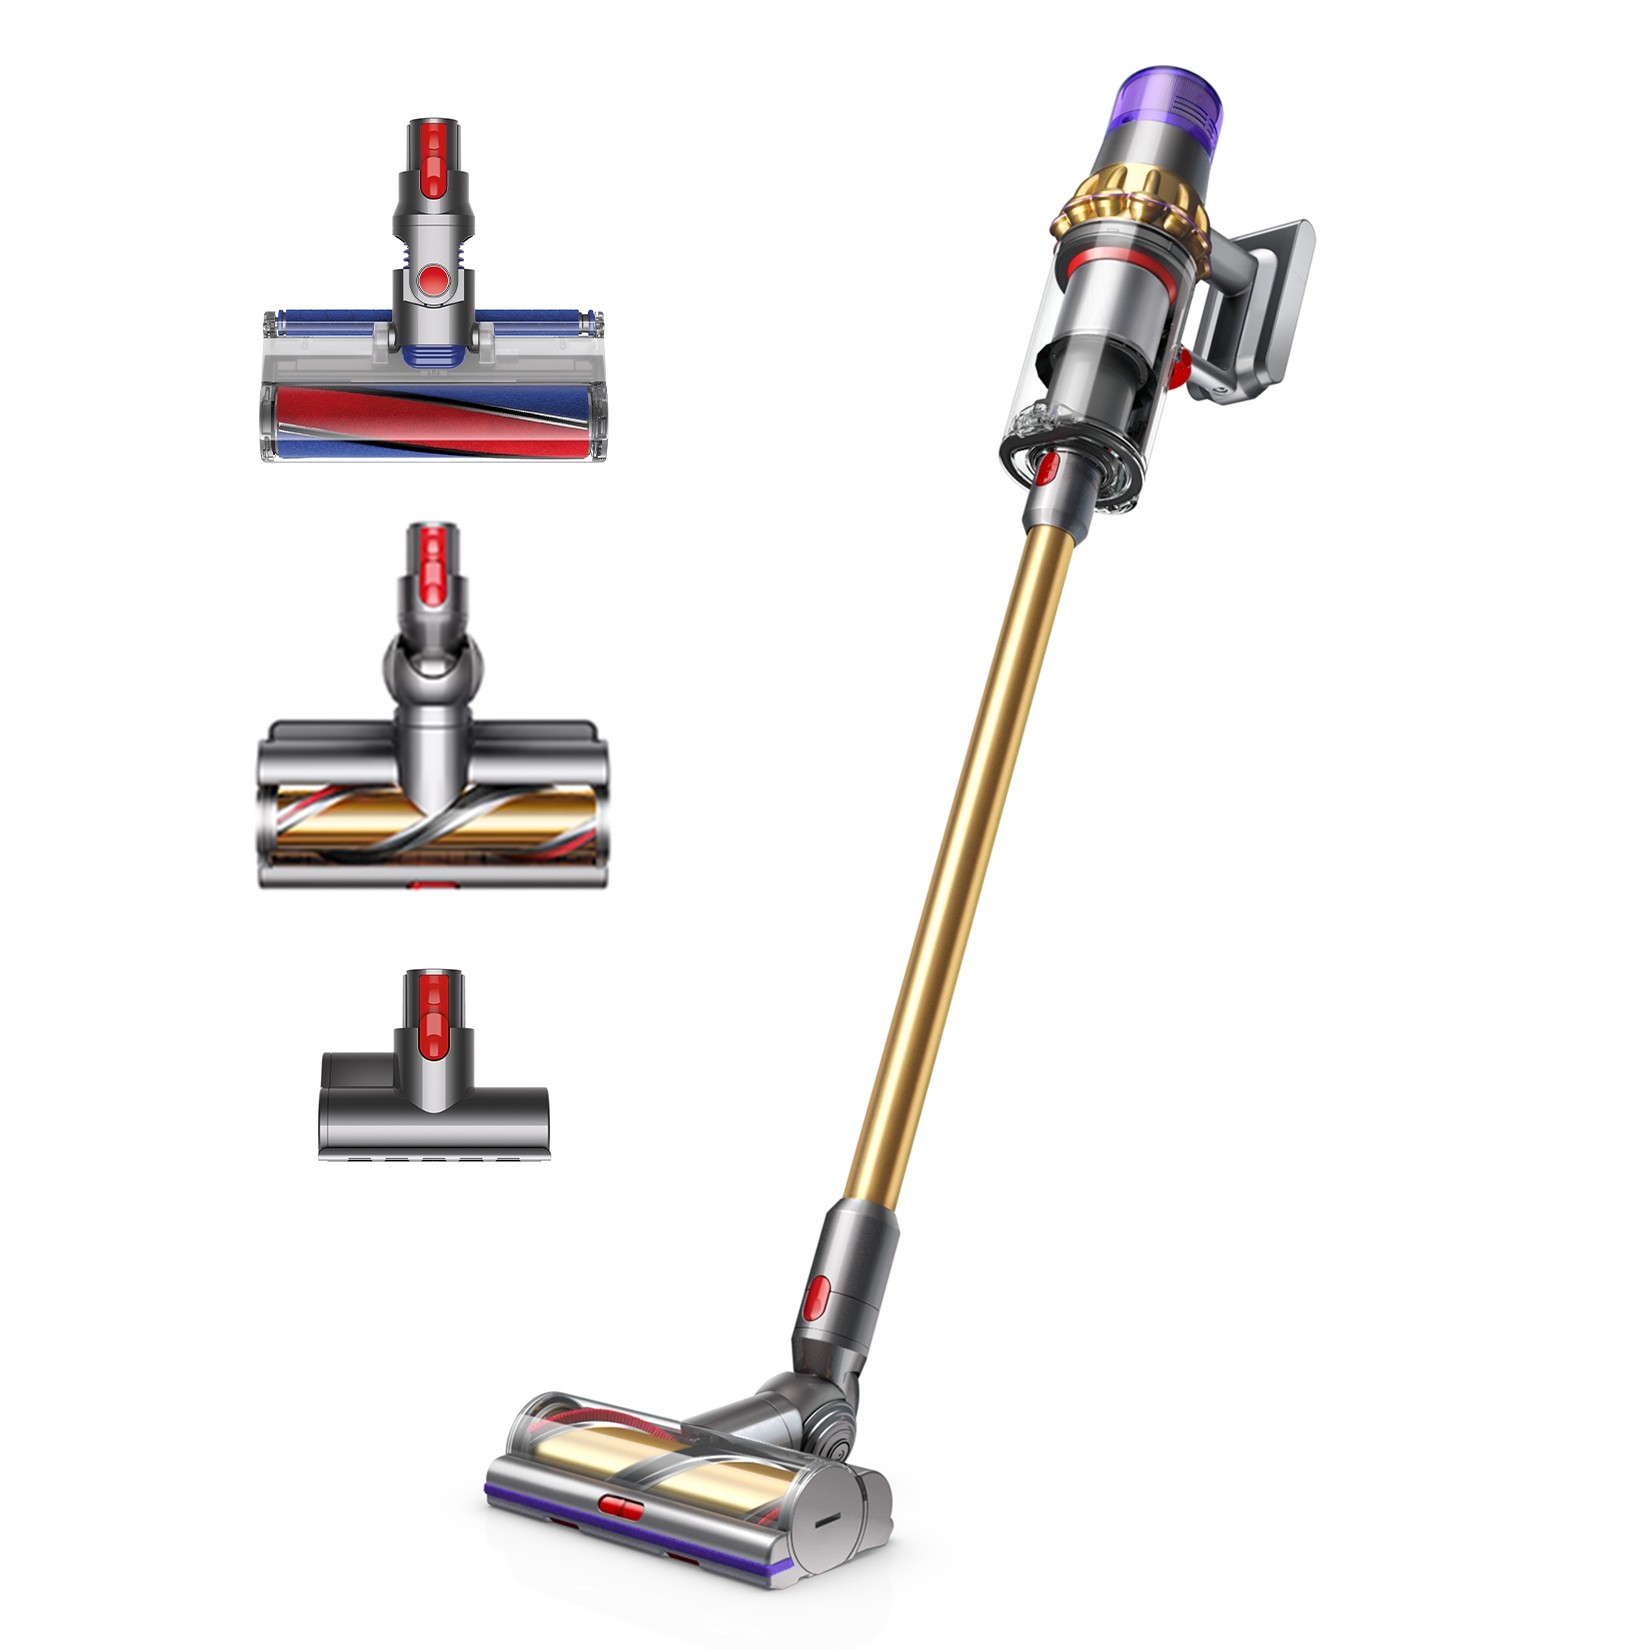 Dyson V11 Vaccuum cleaner